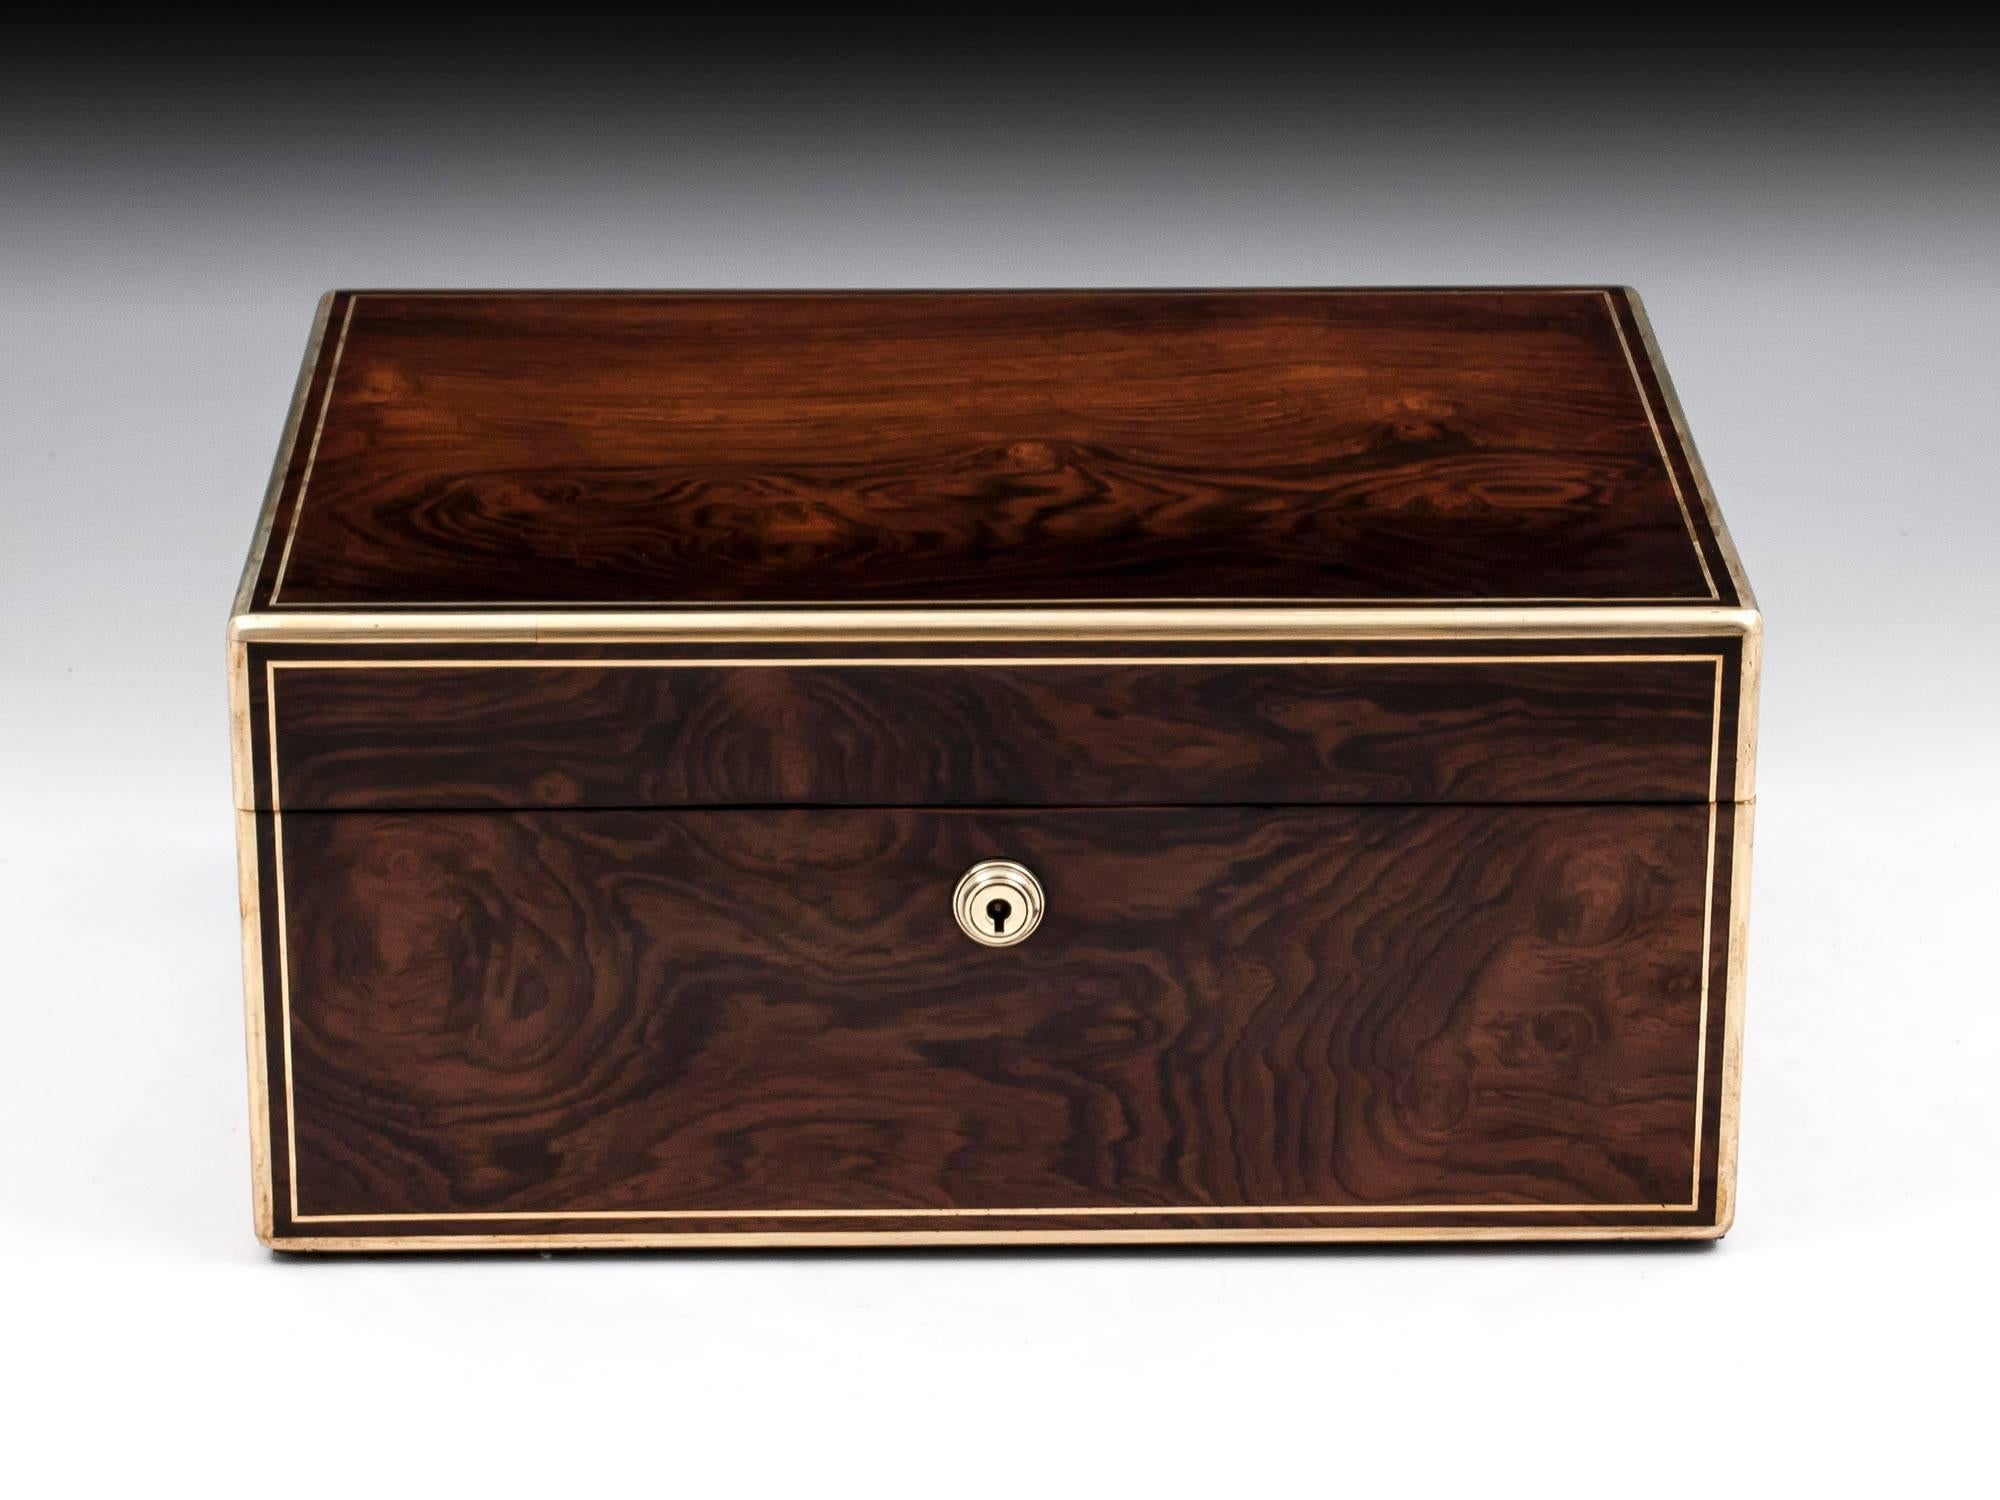 Antique Jewelry box veneered in stunning figured mahogany, with rounded brass edging, stringing, escutcheon and flush fitted campaign carry handles.

The interior is lined in sumptuous padded maroon velvet and silk paper. Featuring a removable